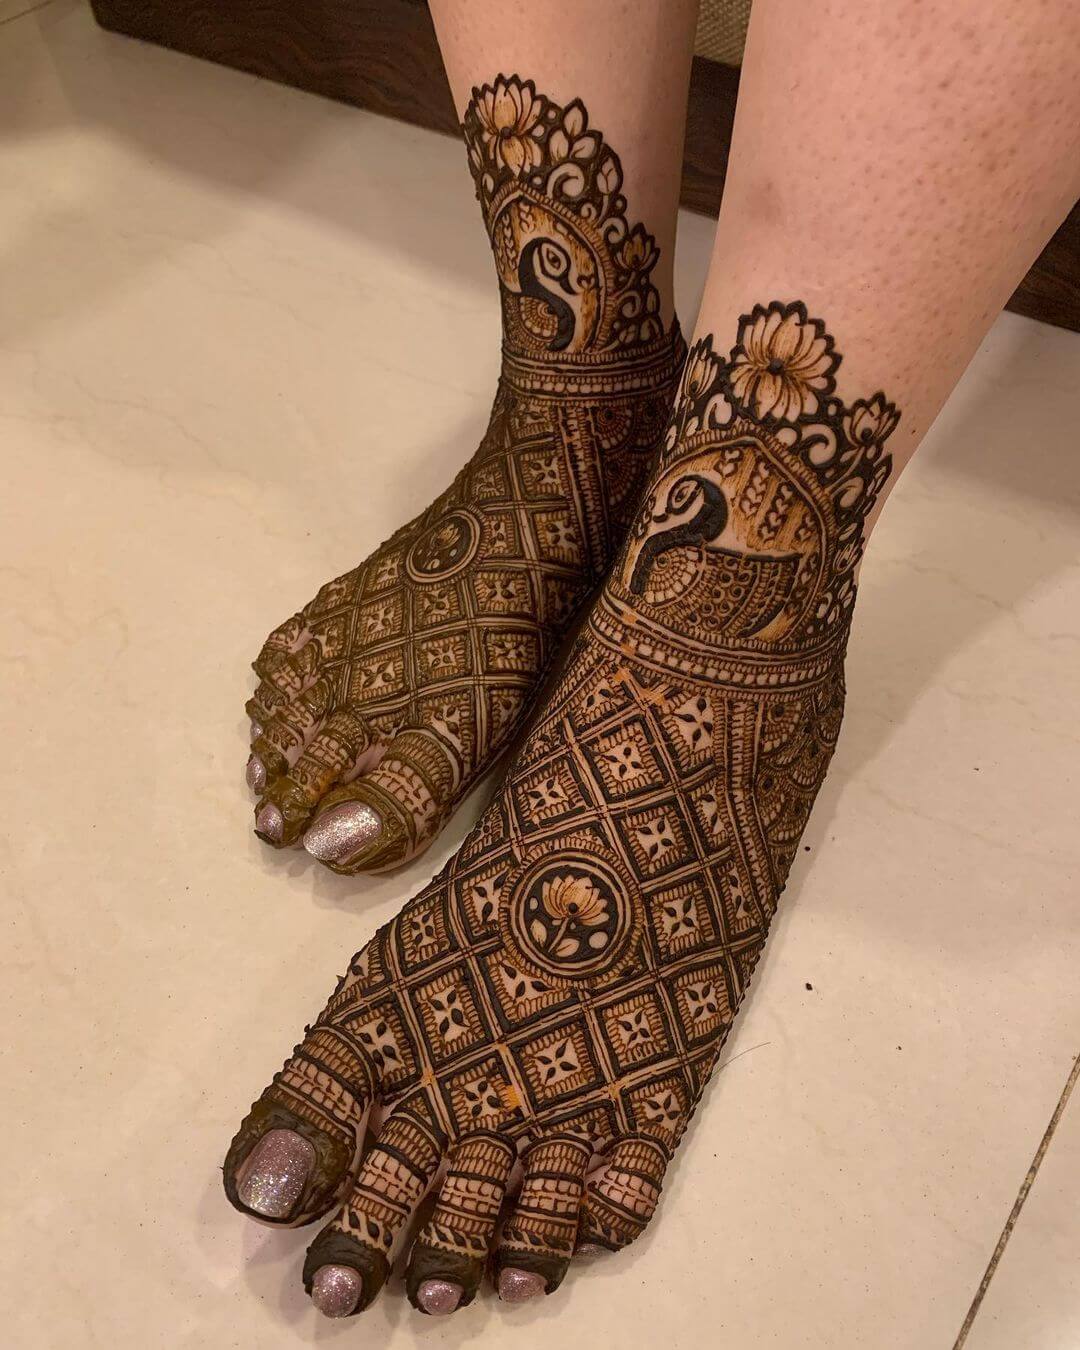 THE TRADITIONAL HENNA